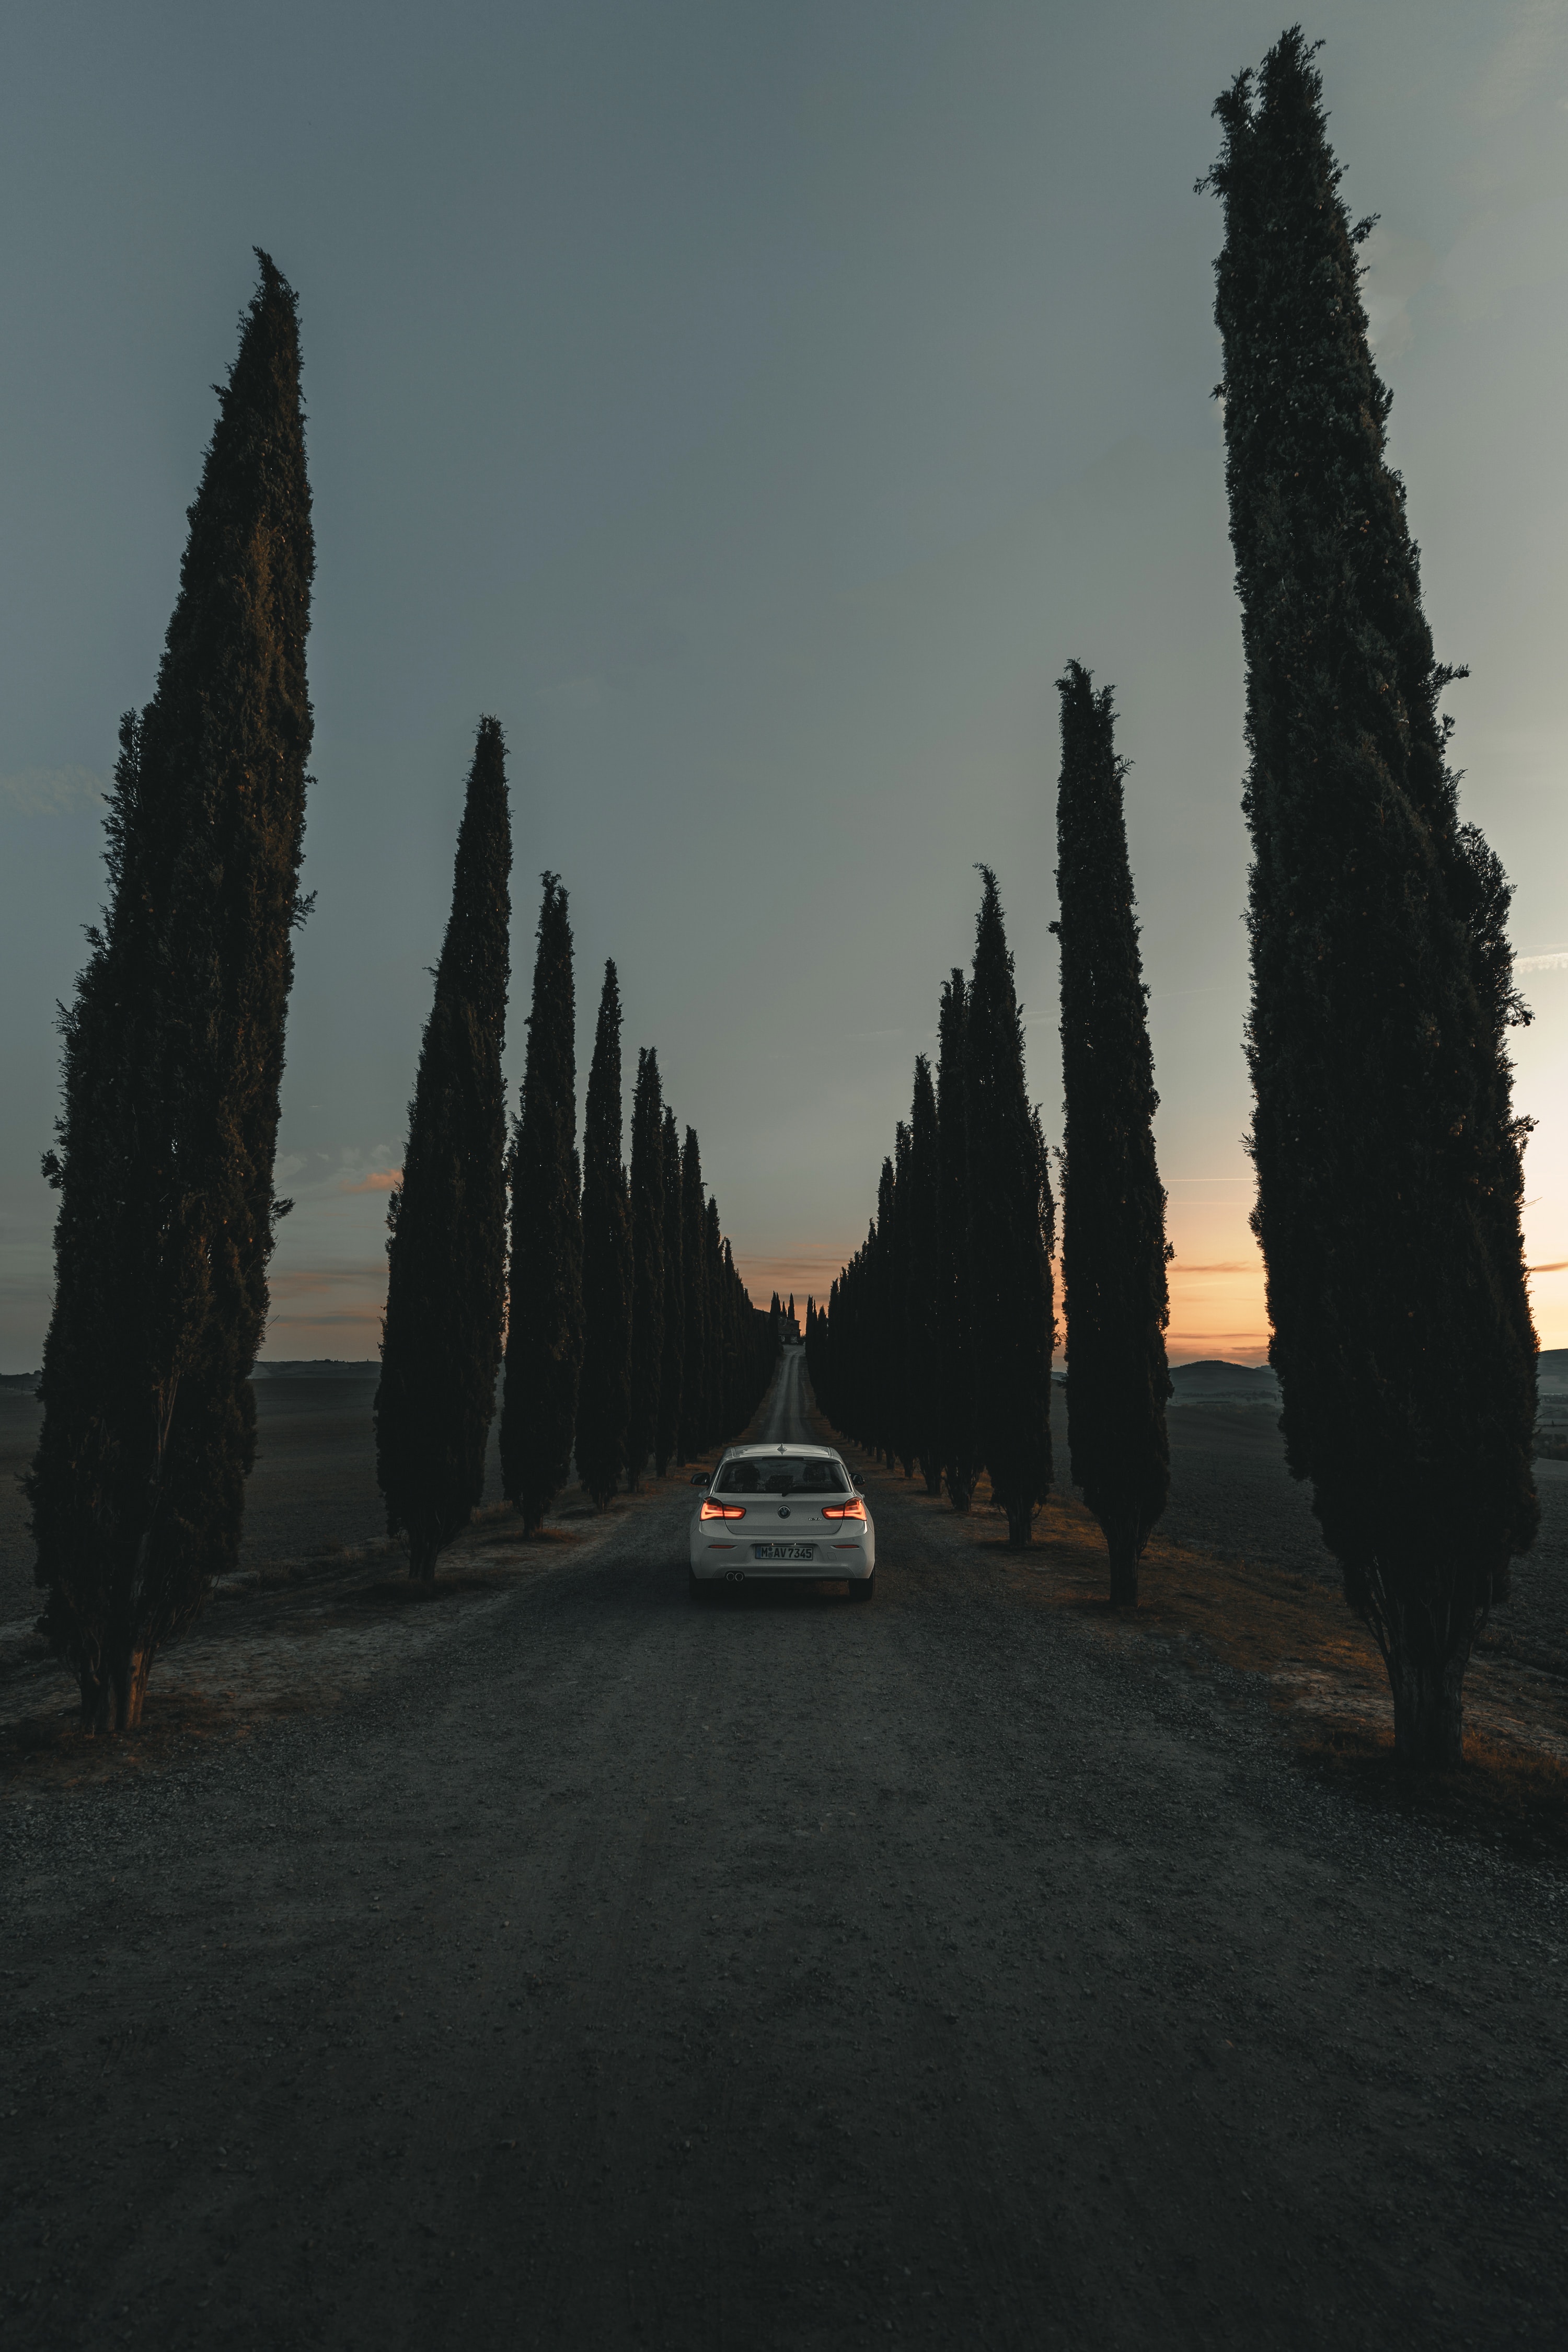 New Lock Screen Wallpapers alley, trees, twilight, cars, road, car, machine, dusk